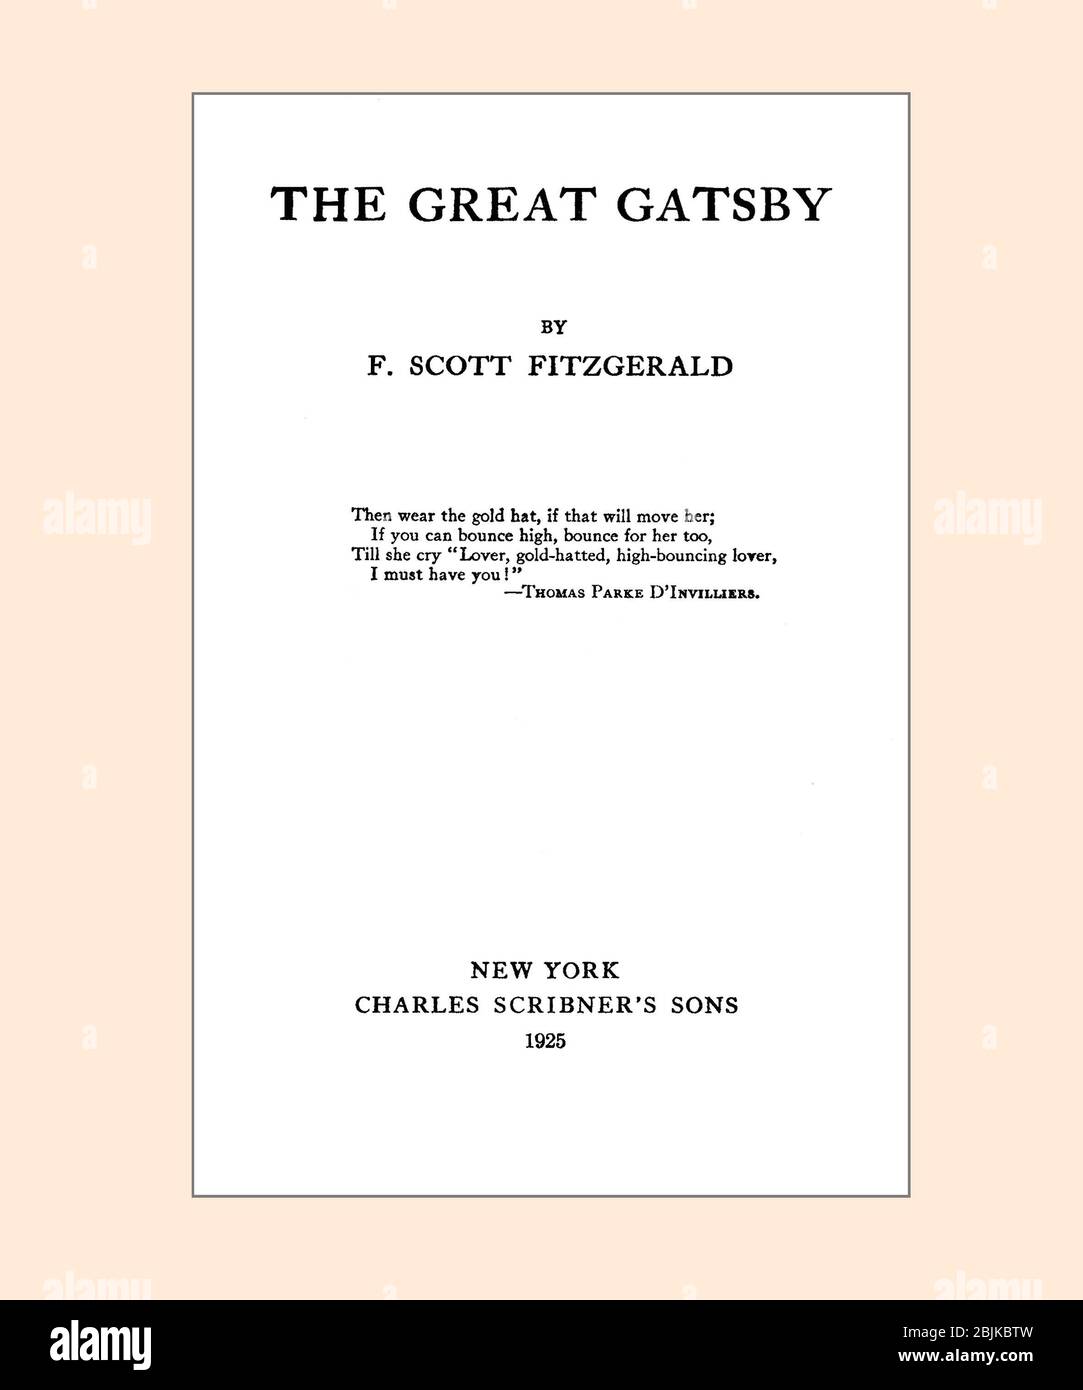 F Scott Fitzgerald The Great Gatsby Title page refreshed and reset Stock Photo